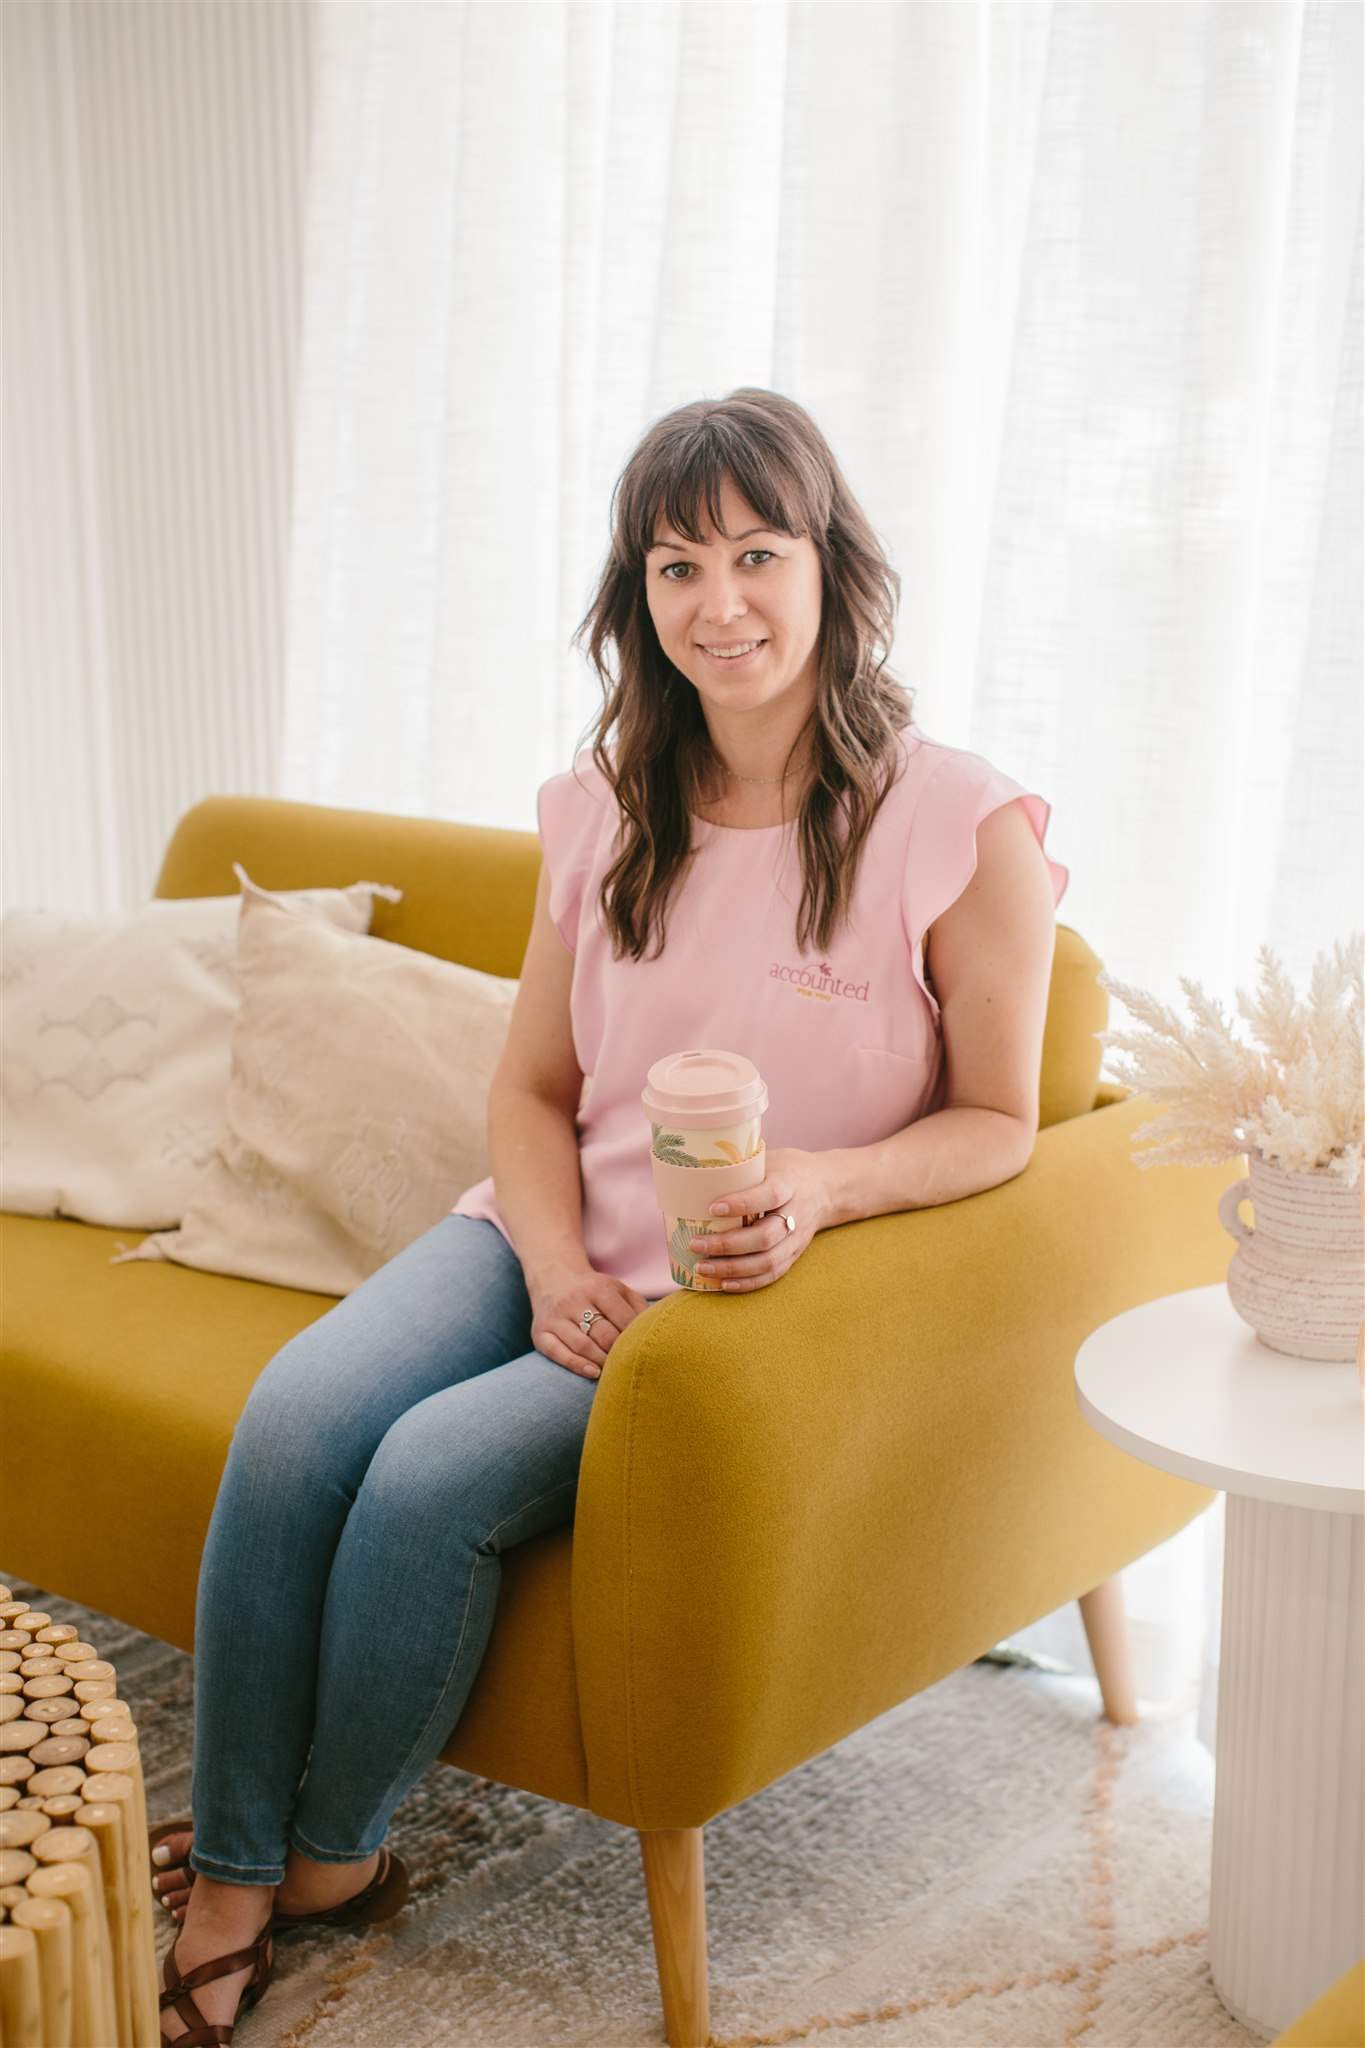 Rebecca Simon, a Bookkeeper from Accounted For You in a pink shirt sitting on a mustard couch, holding a cup of coffee.